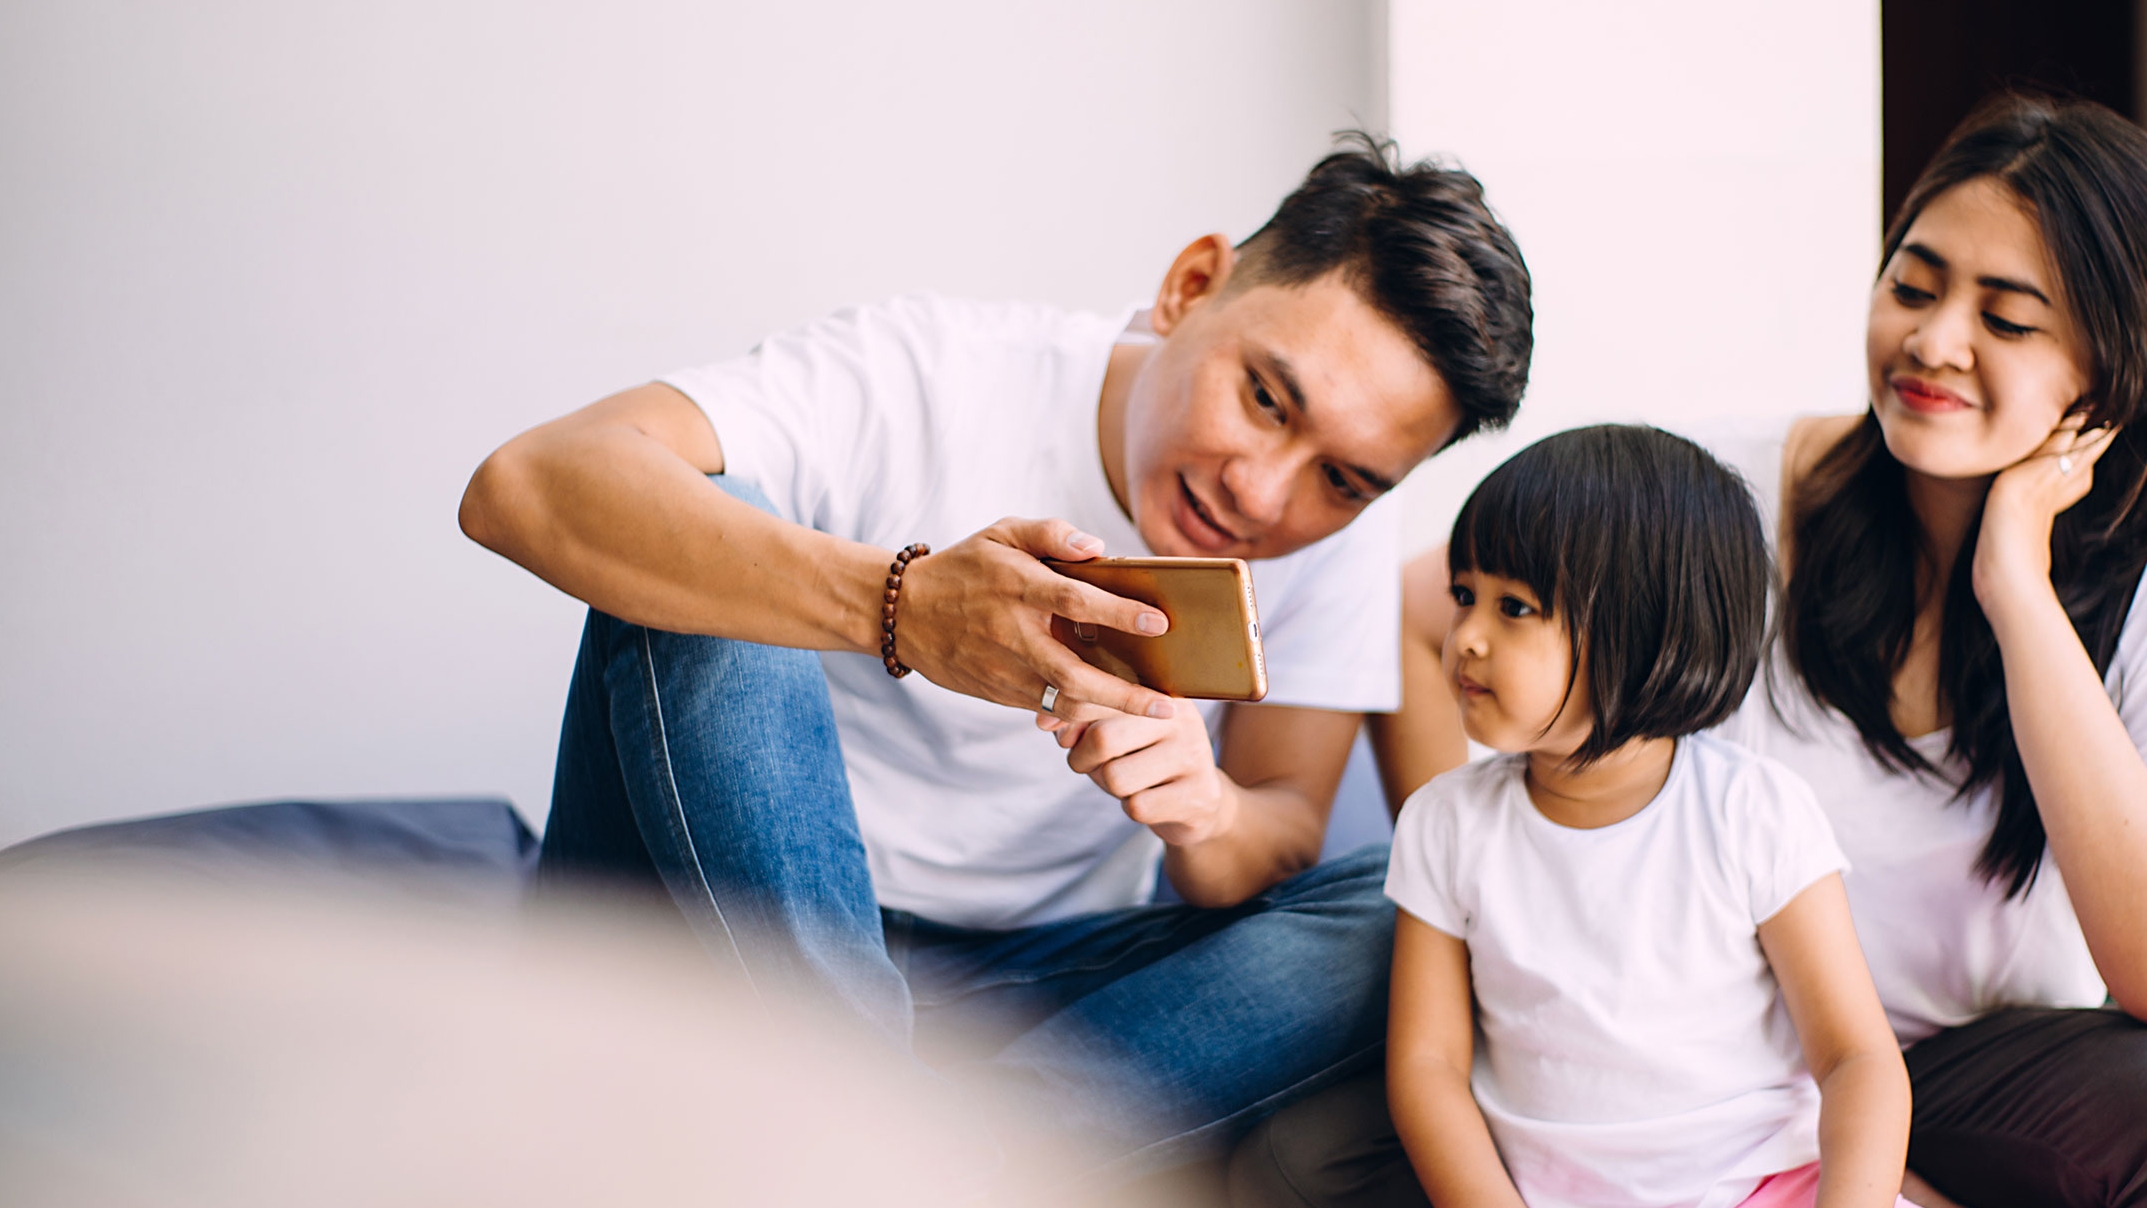 Image of a young family looking at a mobile phone screen